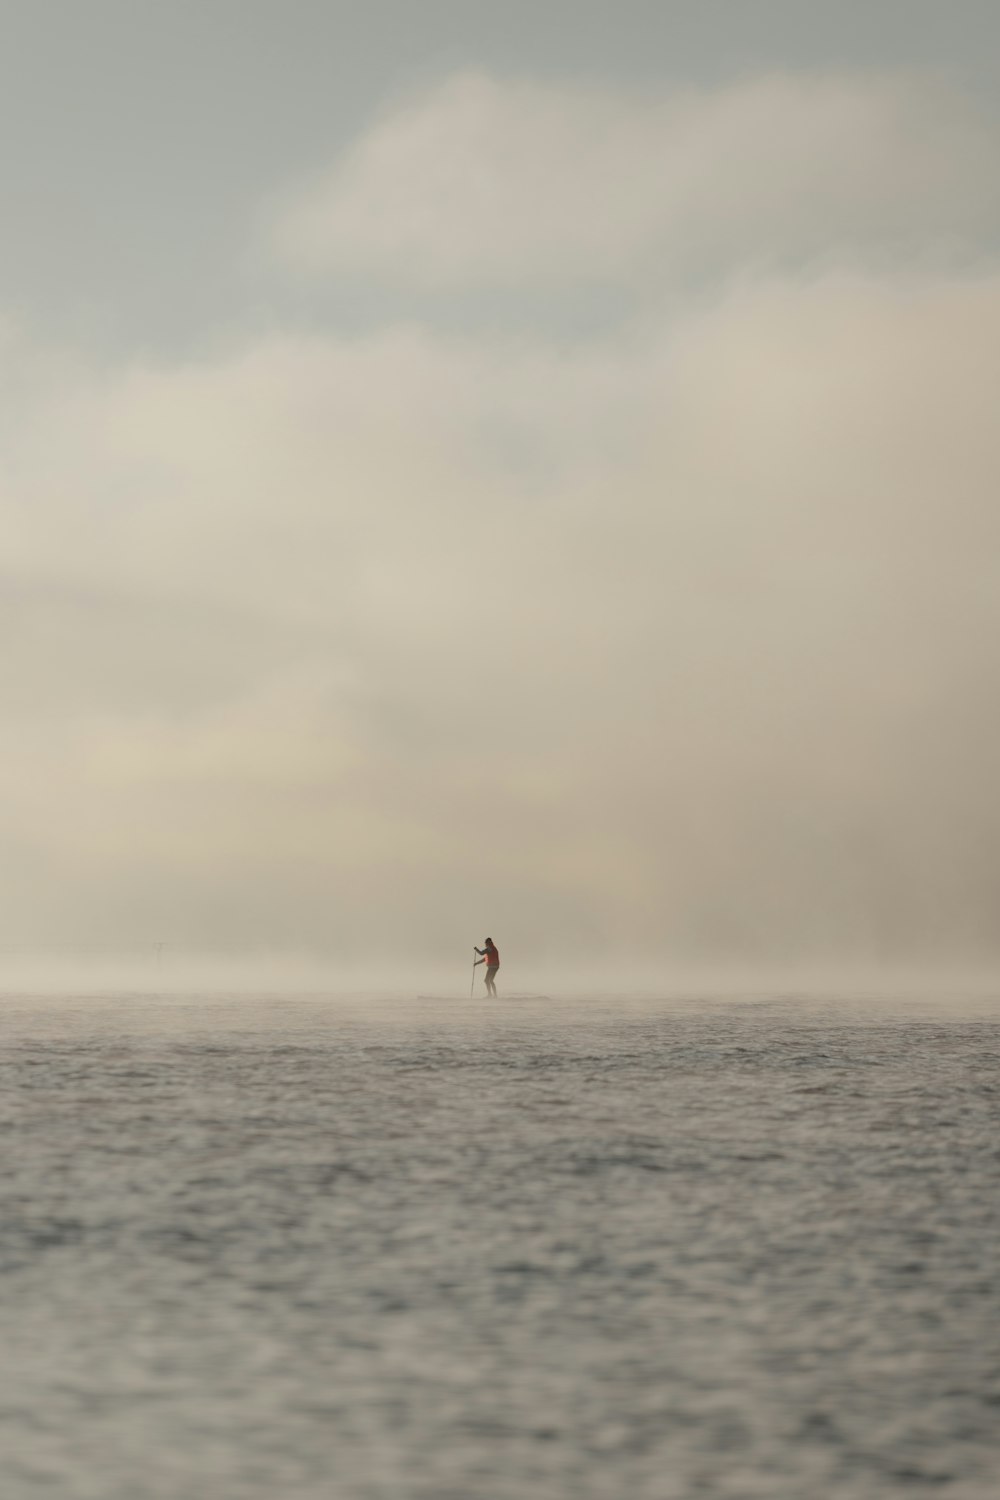 a person para sailing in the ocean on a cloudy day